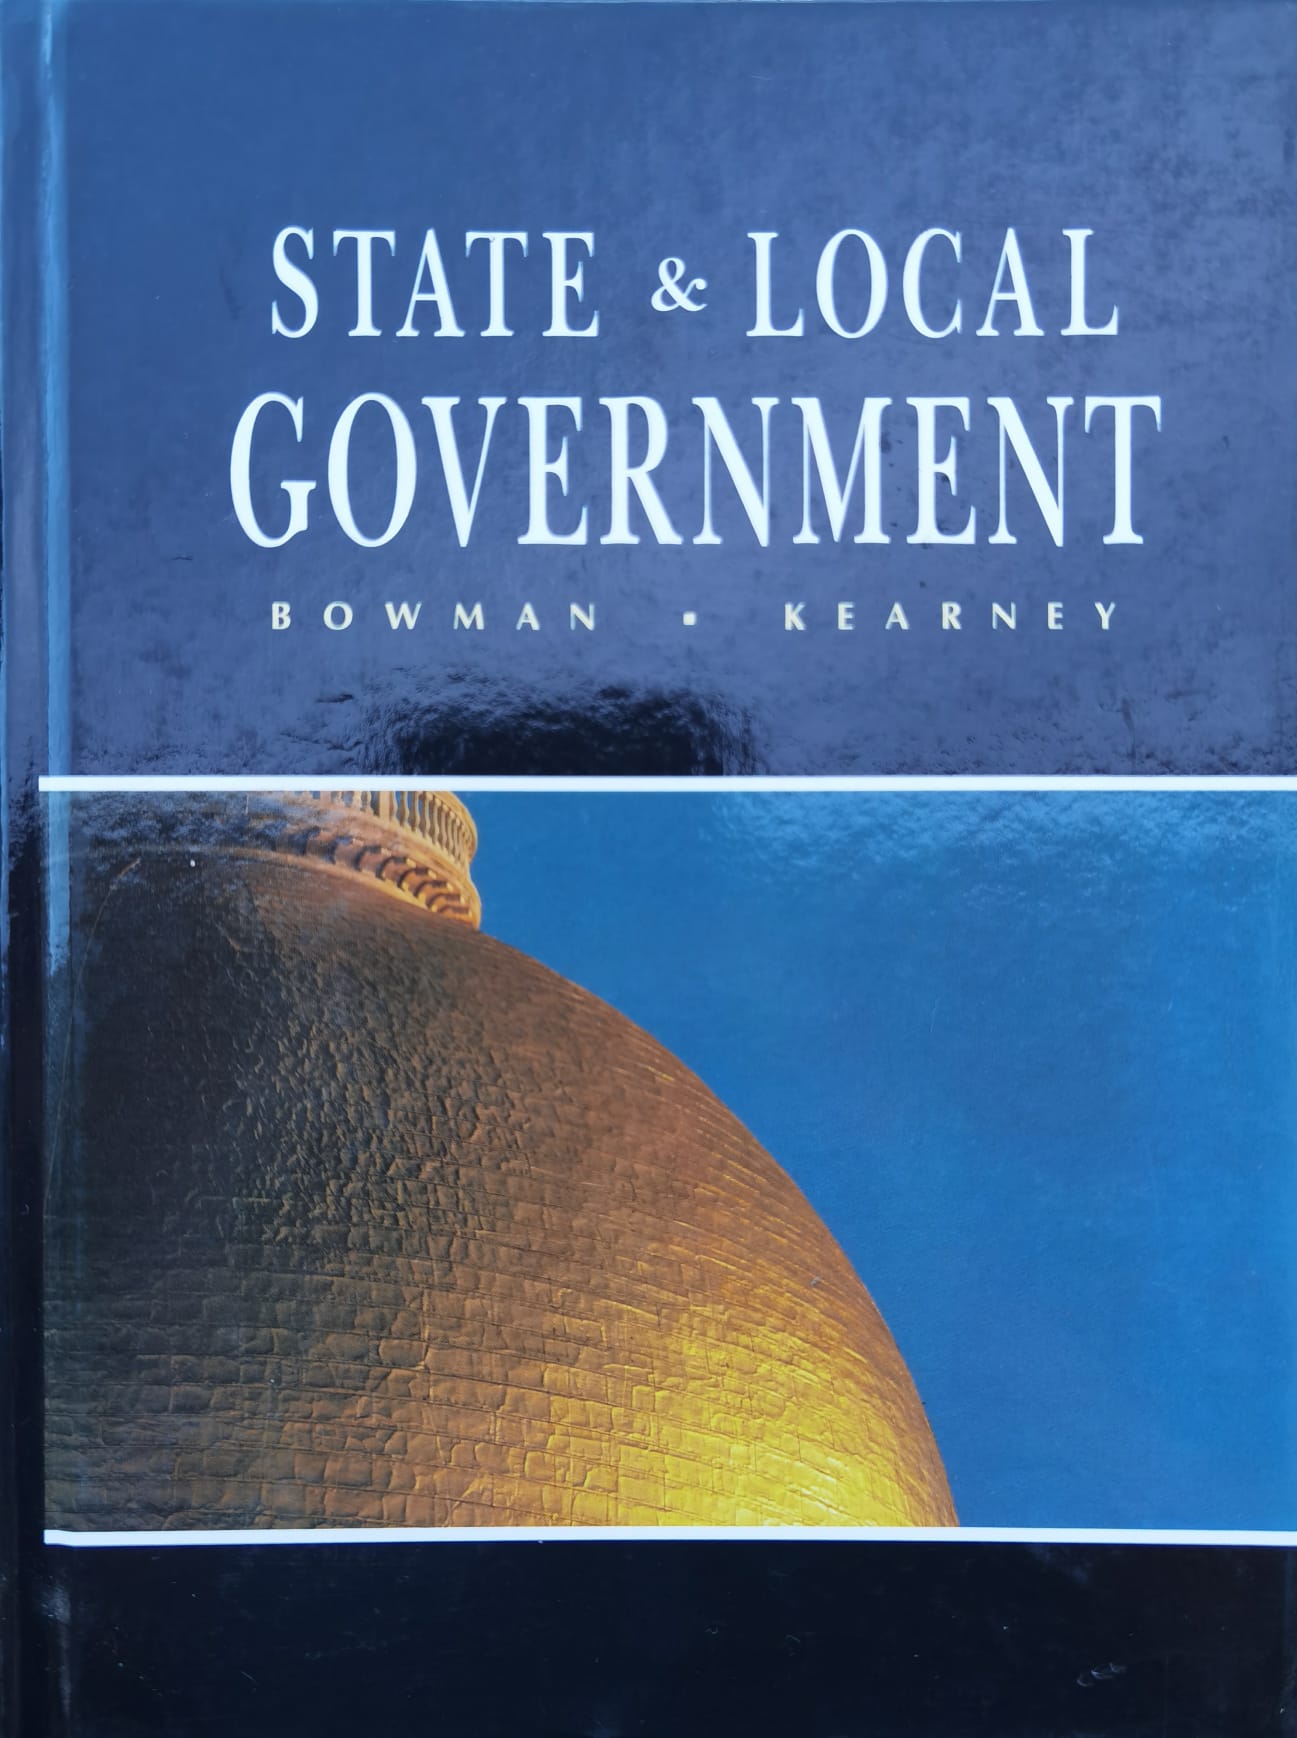 state & local government                                                                             bowman kearney                                                                                      